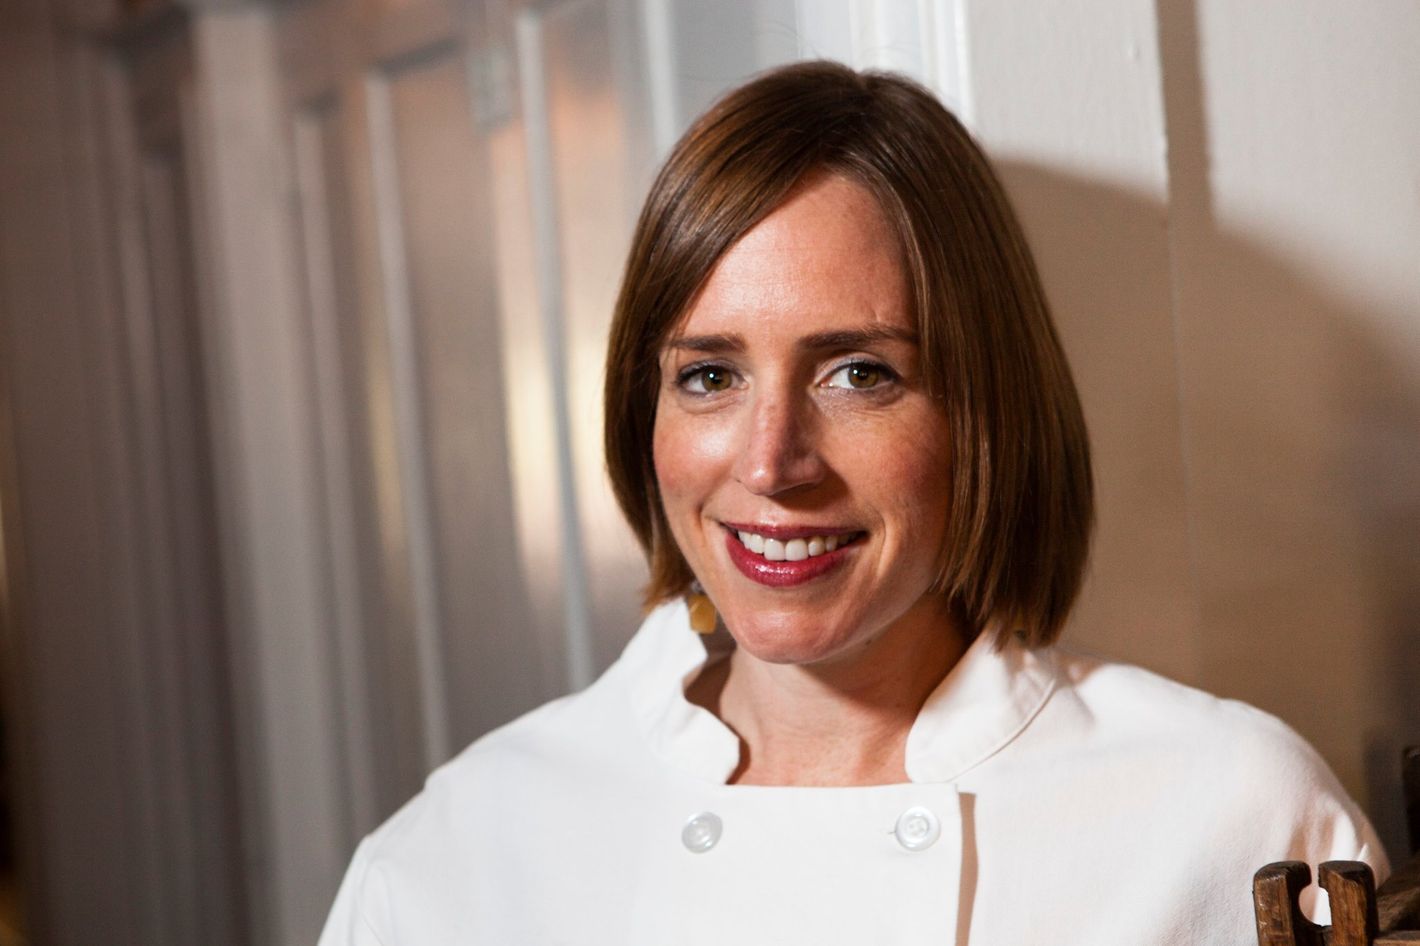 City Grit's Sarah Simmons Opening Restaurant Serving Fried Chicken and  Champagne